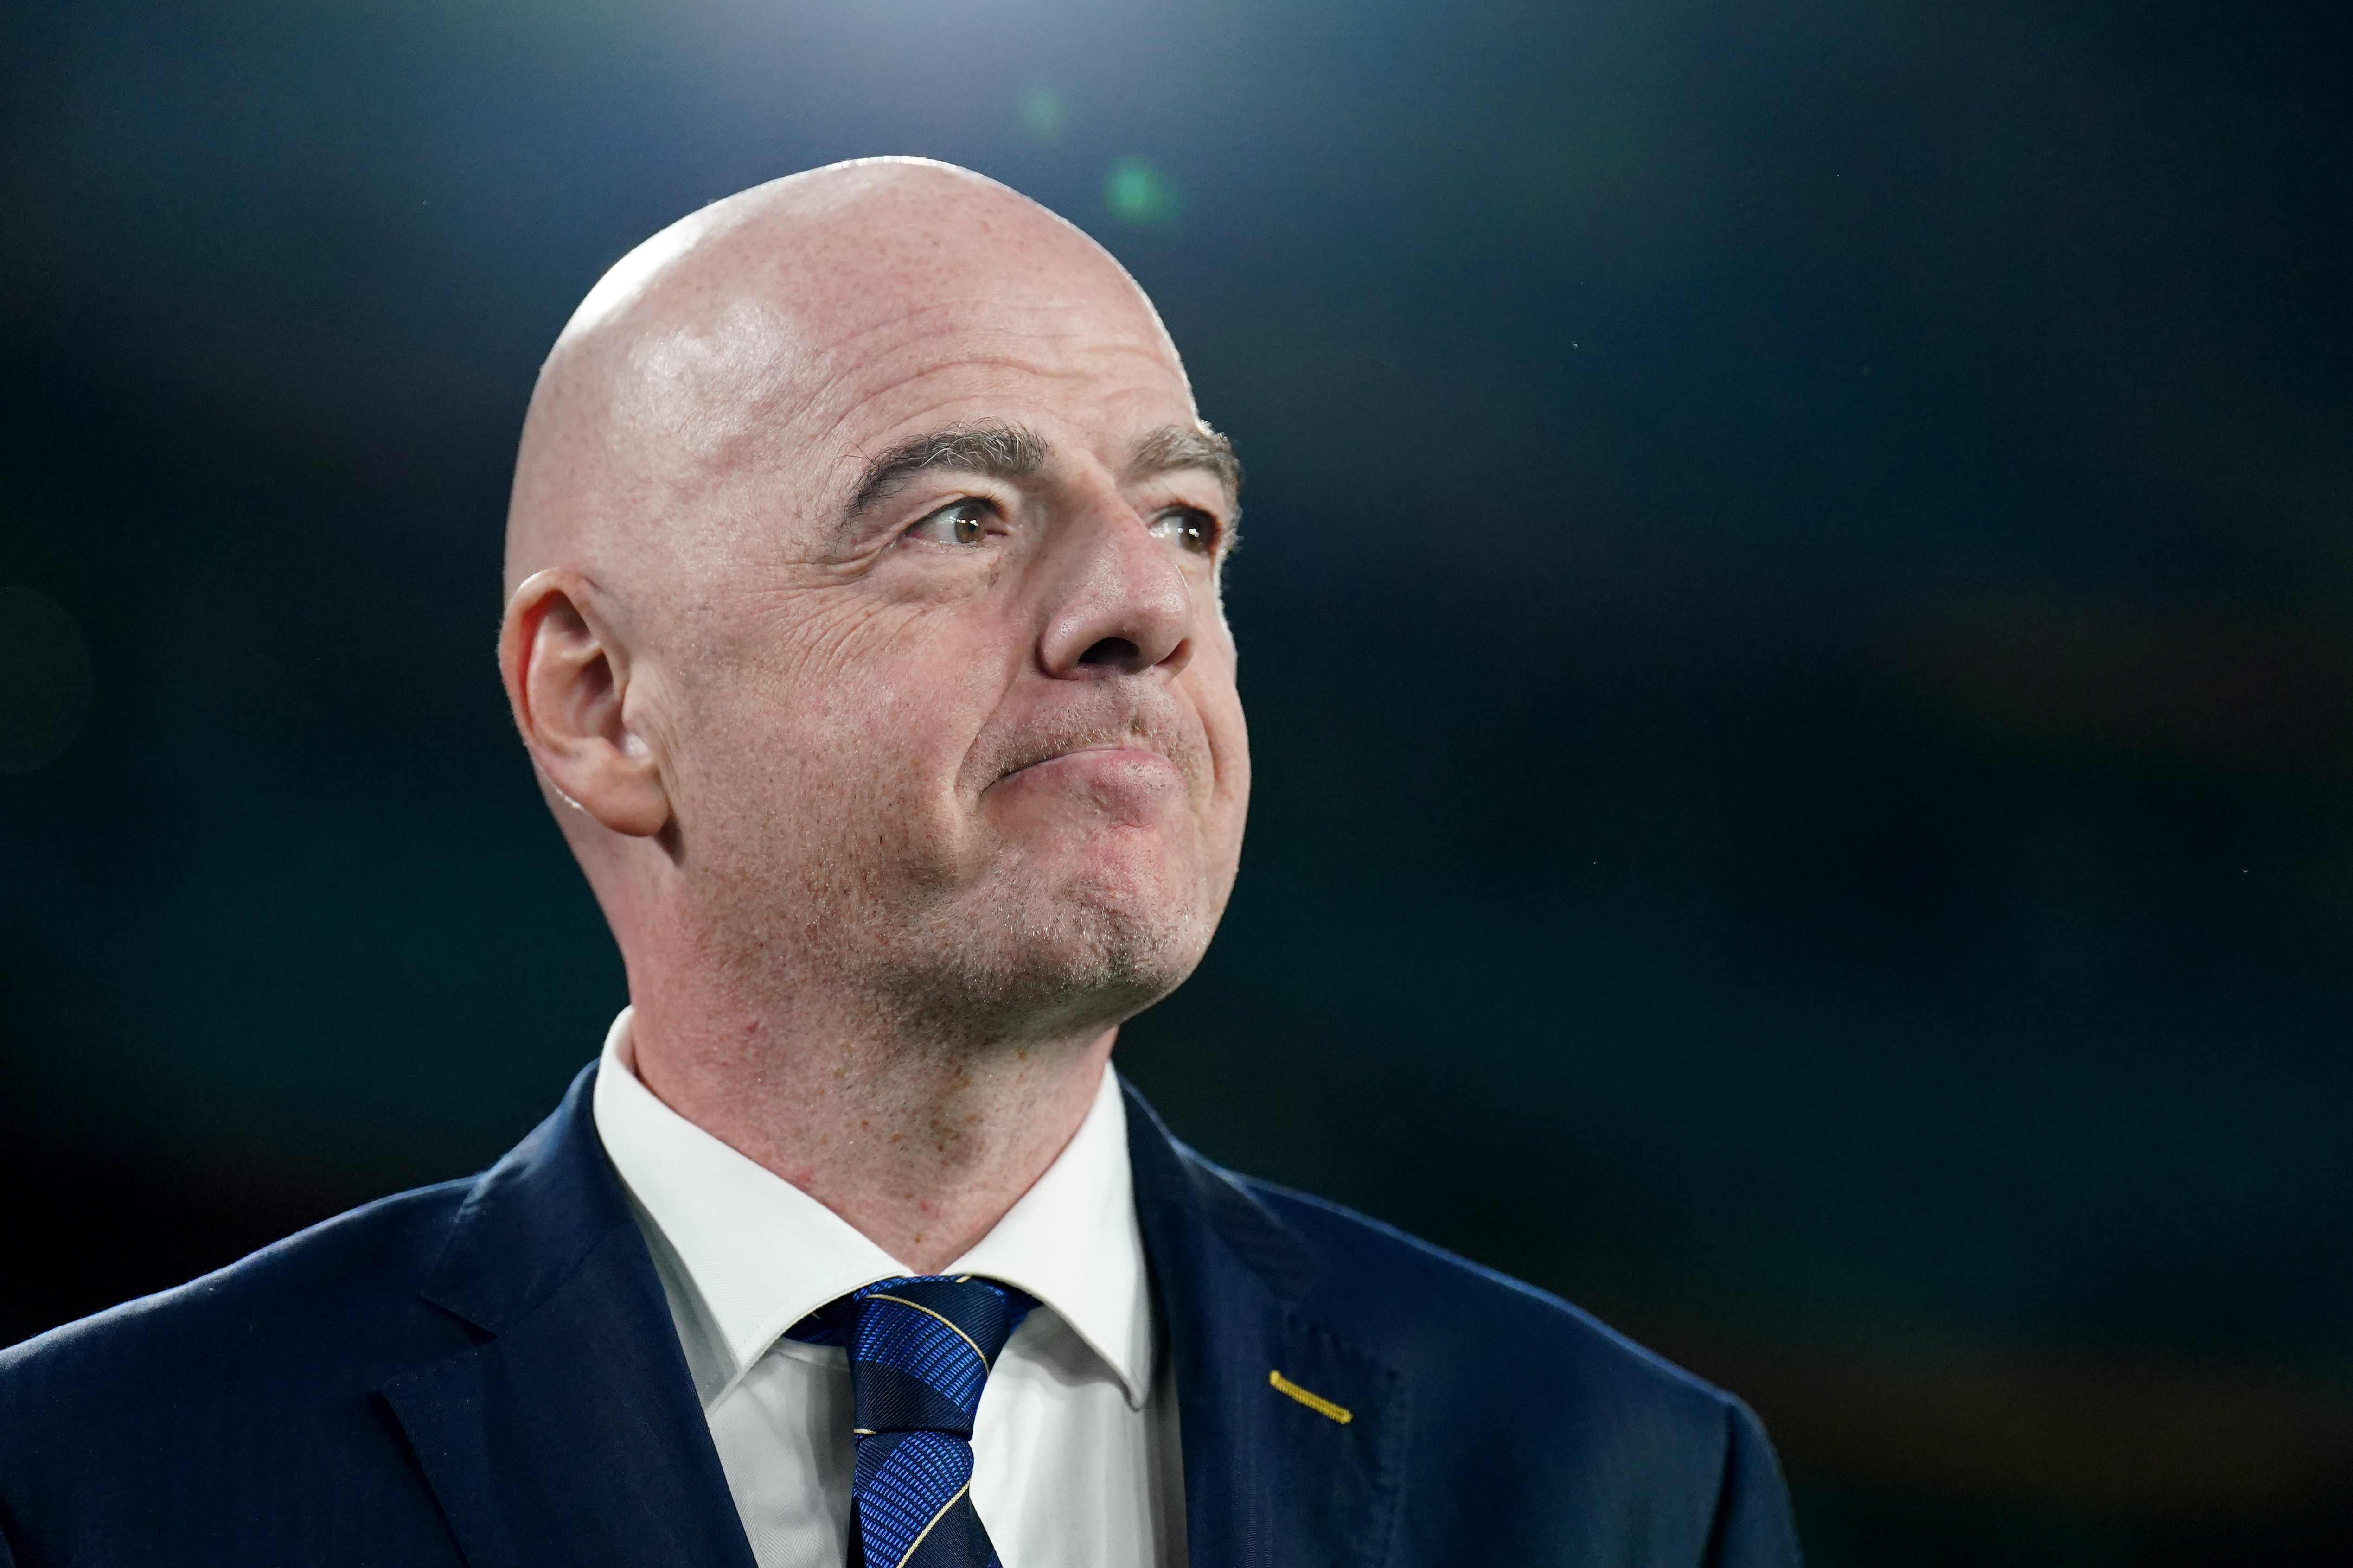 FIFA president Gianni Infantino condemned the incident.